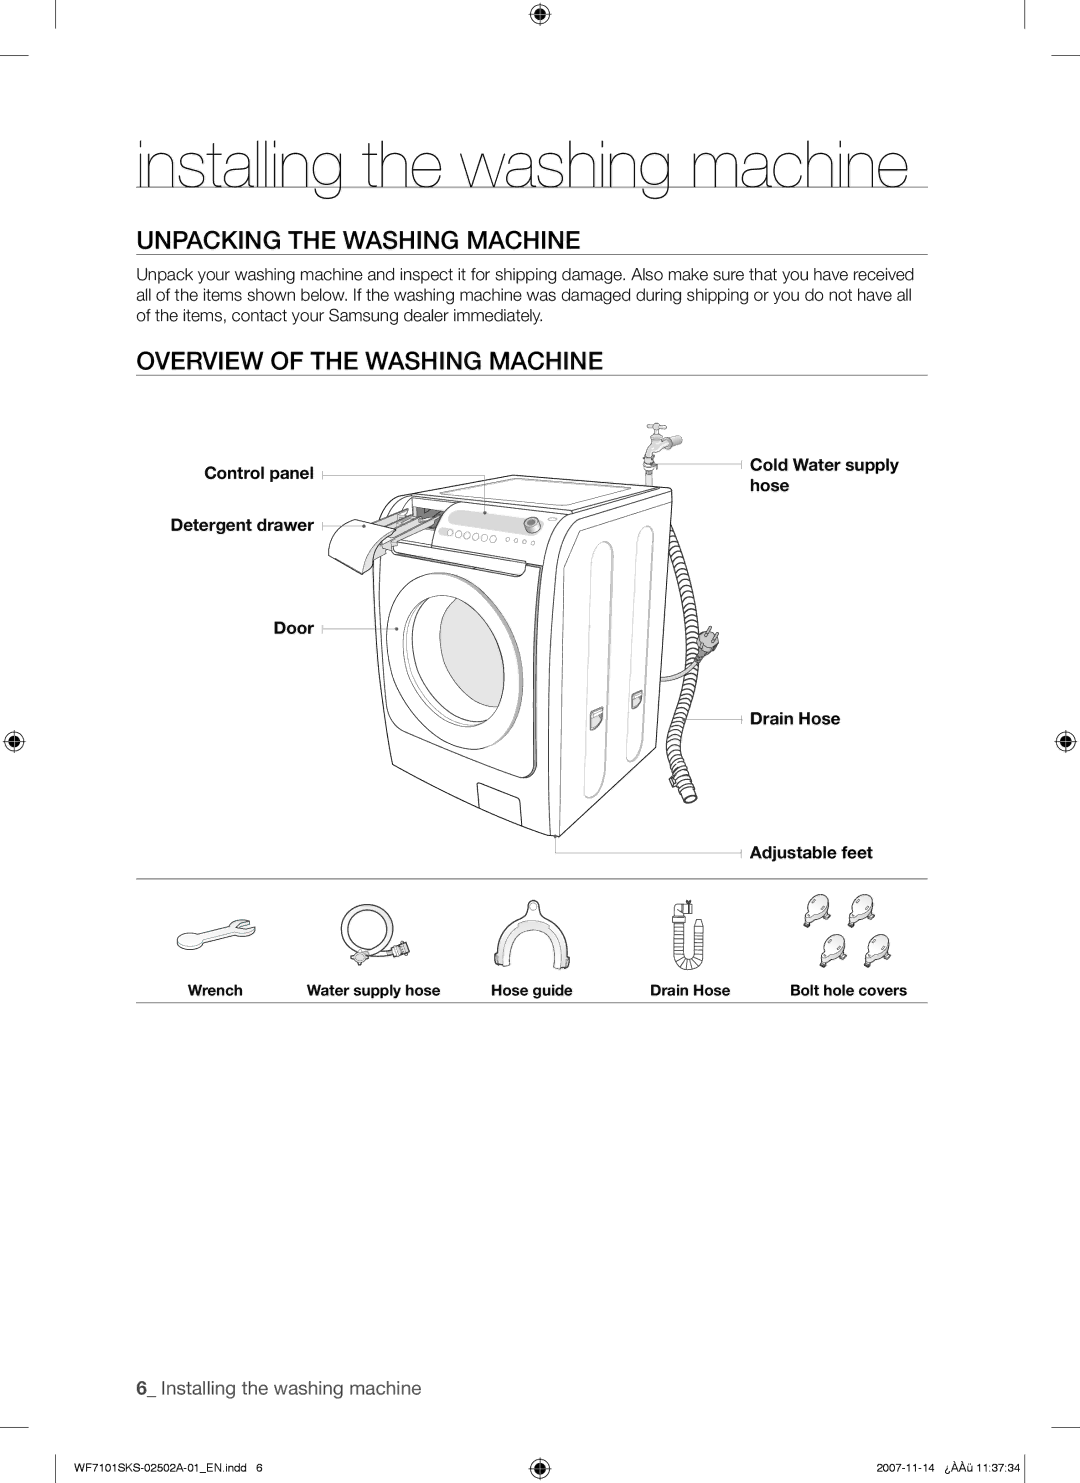 Samsung WF7101SKS/XET manual Installing the washing machine, Unpacking the Washing Machine, Overview of the Washing Machine 